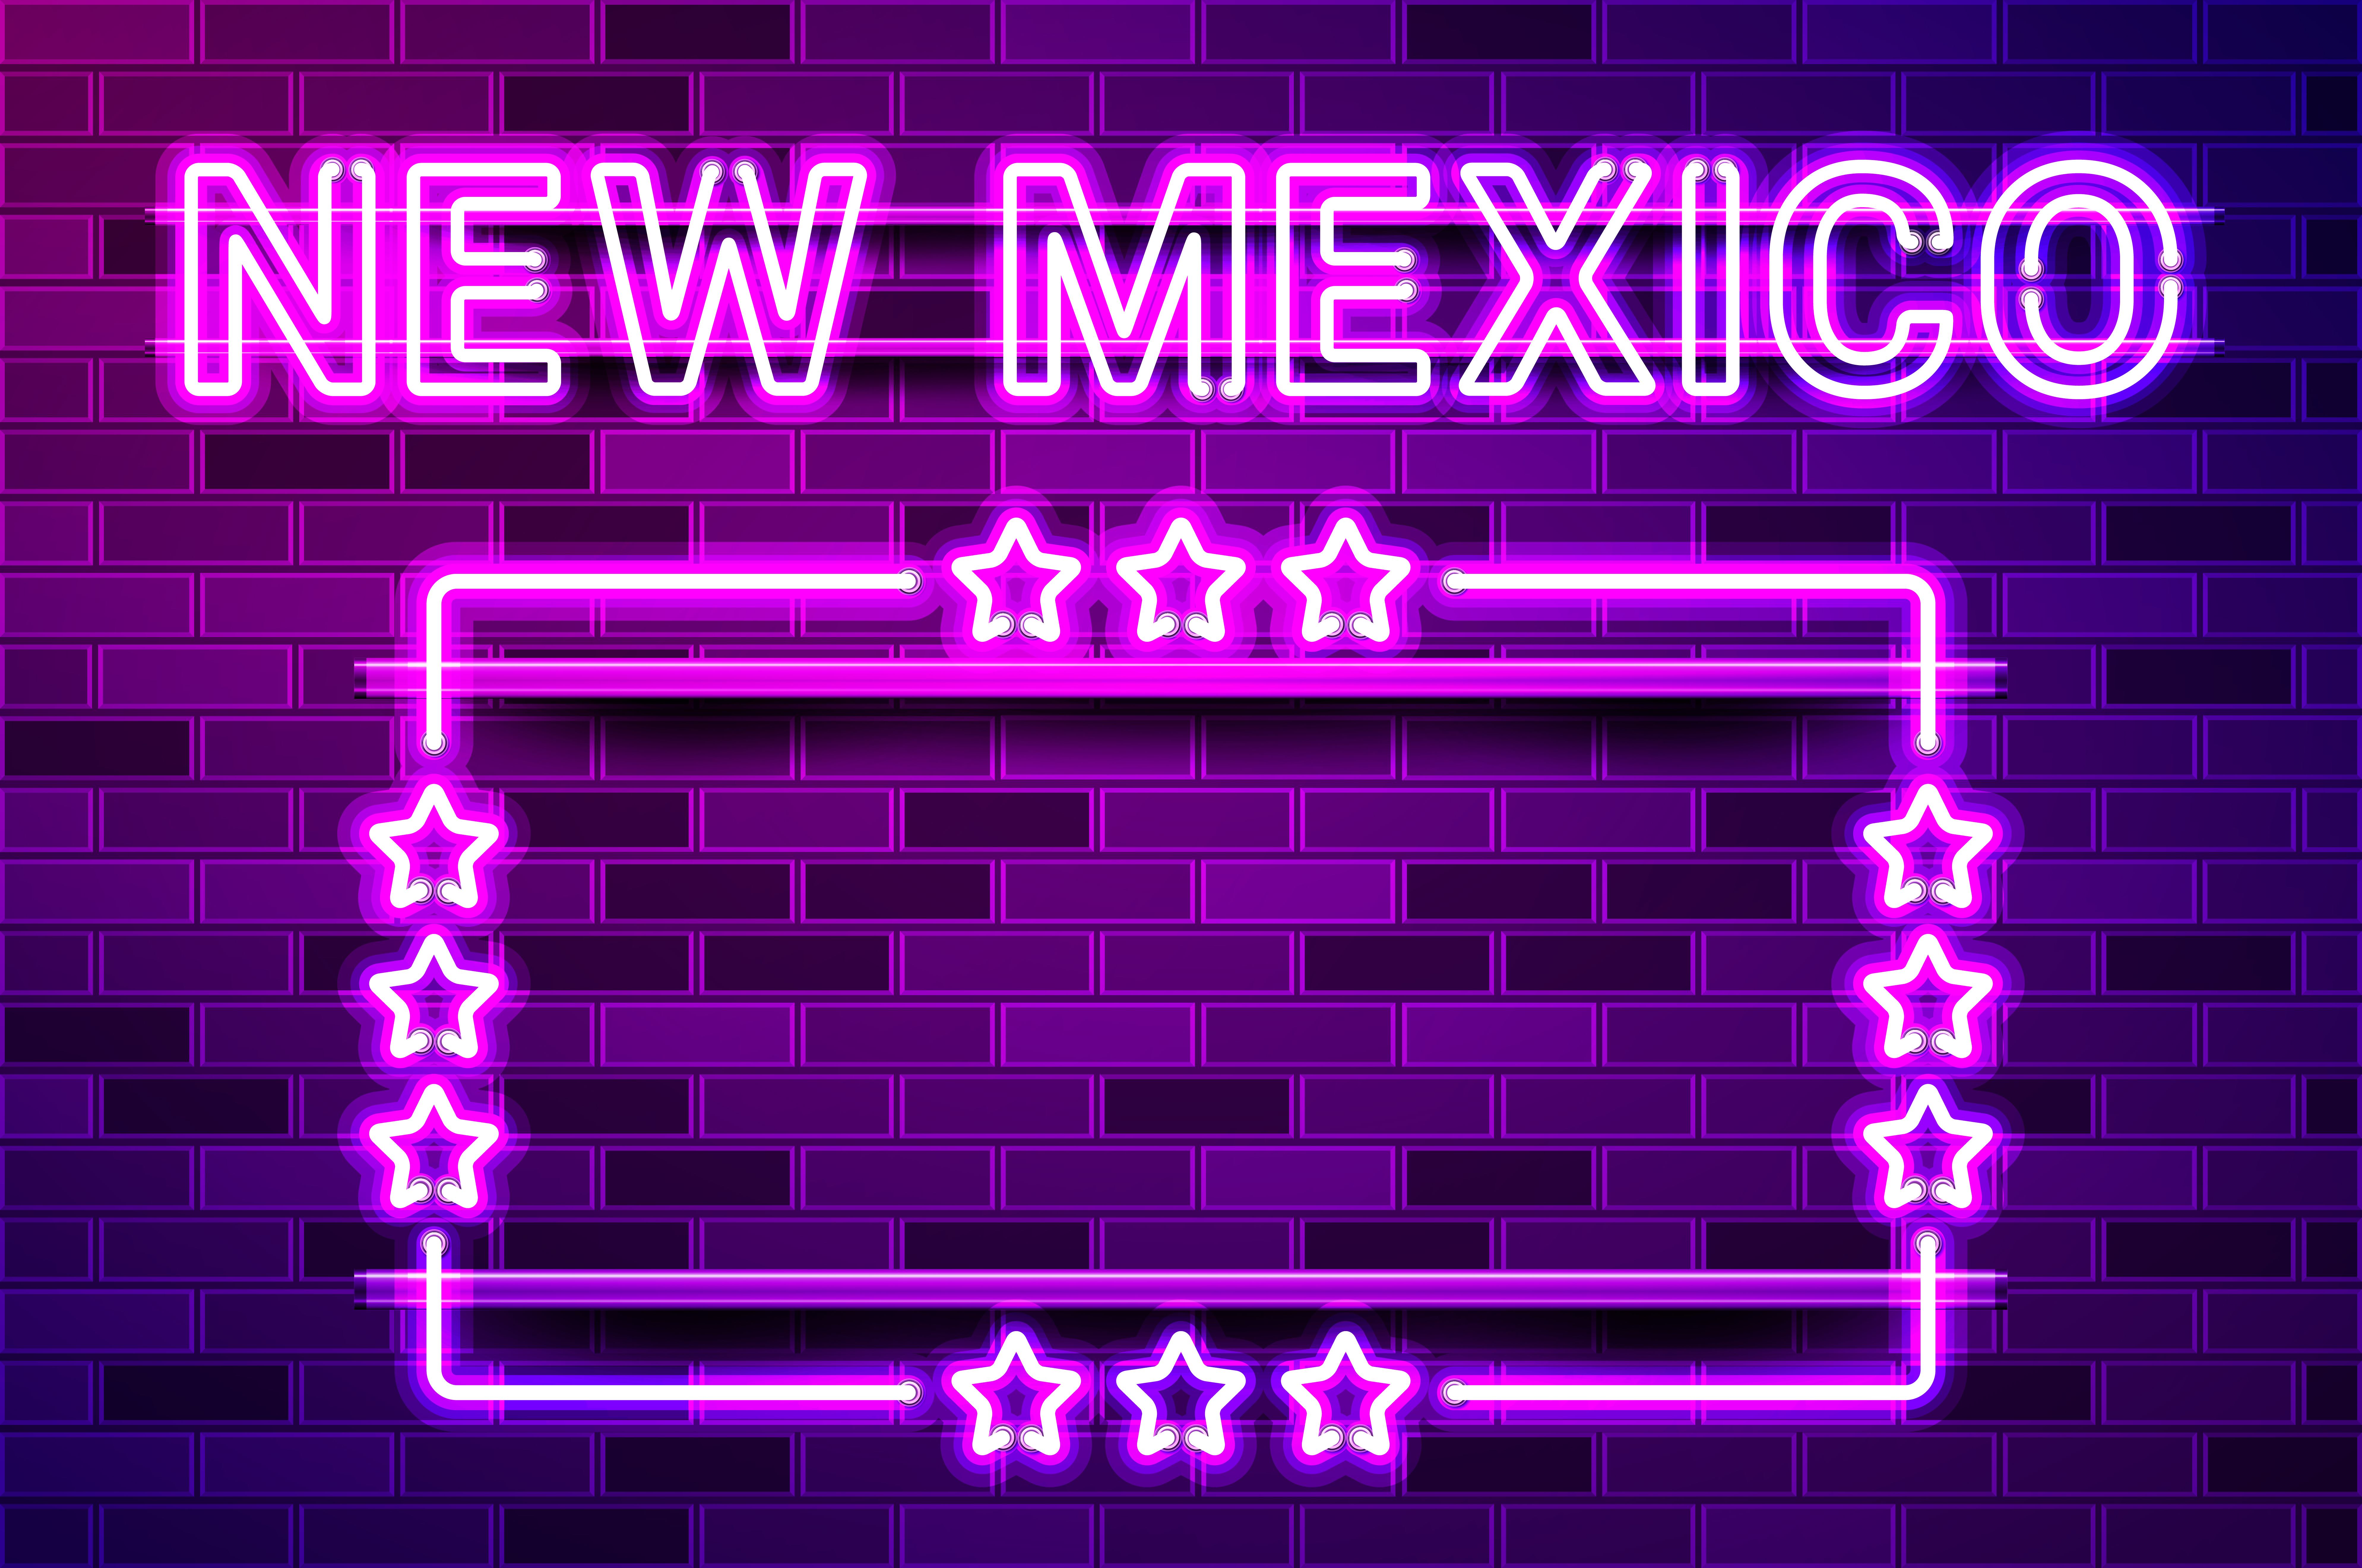 New Mexico US State glowing purple neon lettering and a rectangular frame with stars. Realistic vector illustration. Purple brick wall, violet glow, metal holders.. New Mexico US State glowing purple neon lettering and a rectangular frame with stars